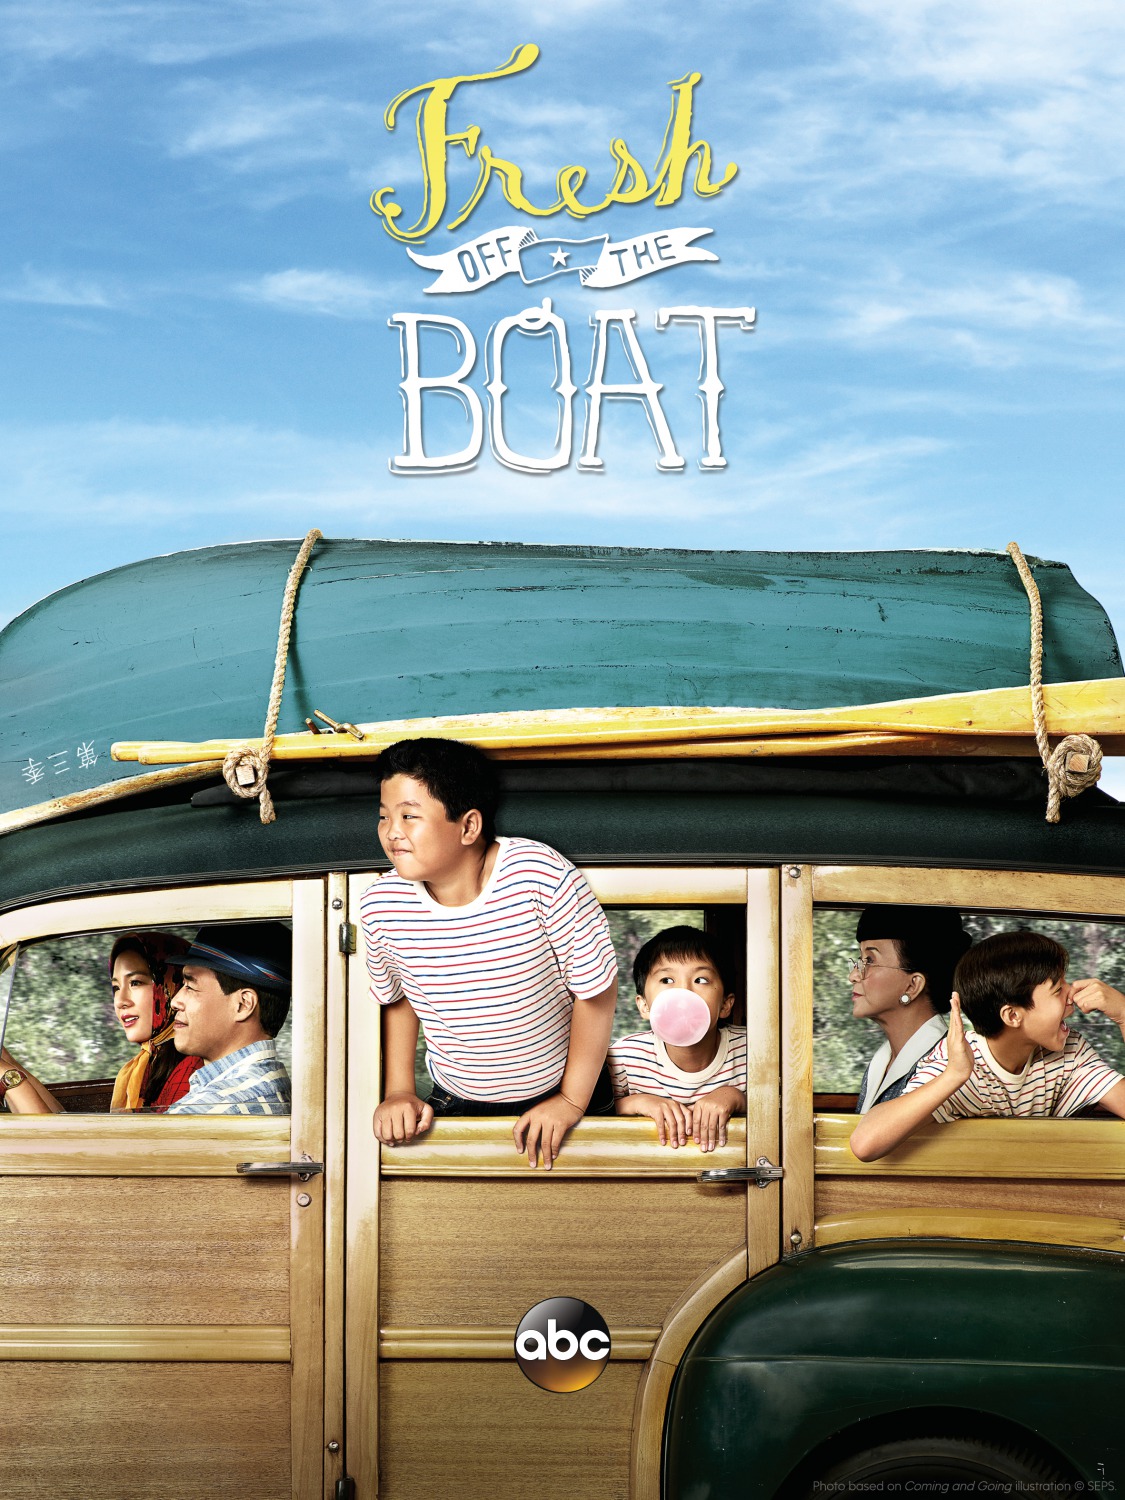 Extra Large TV Poster Image for Fresh Off the Boat (#3 of 5)